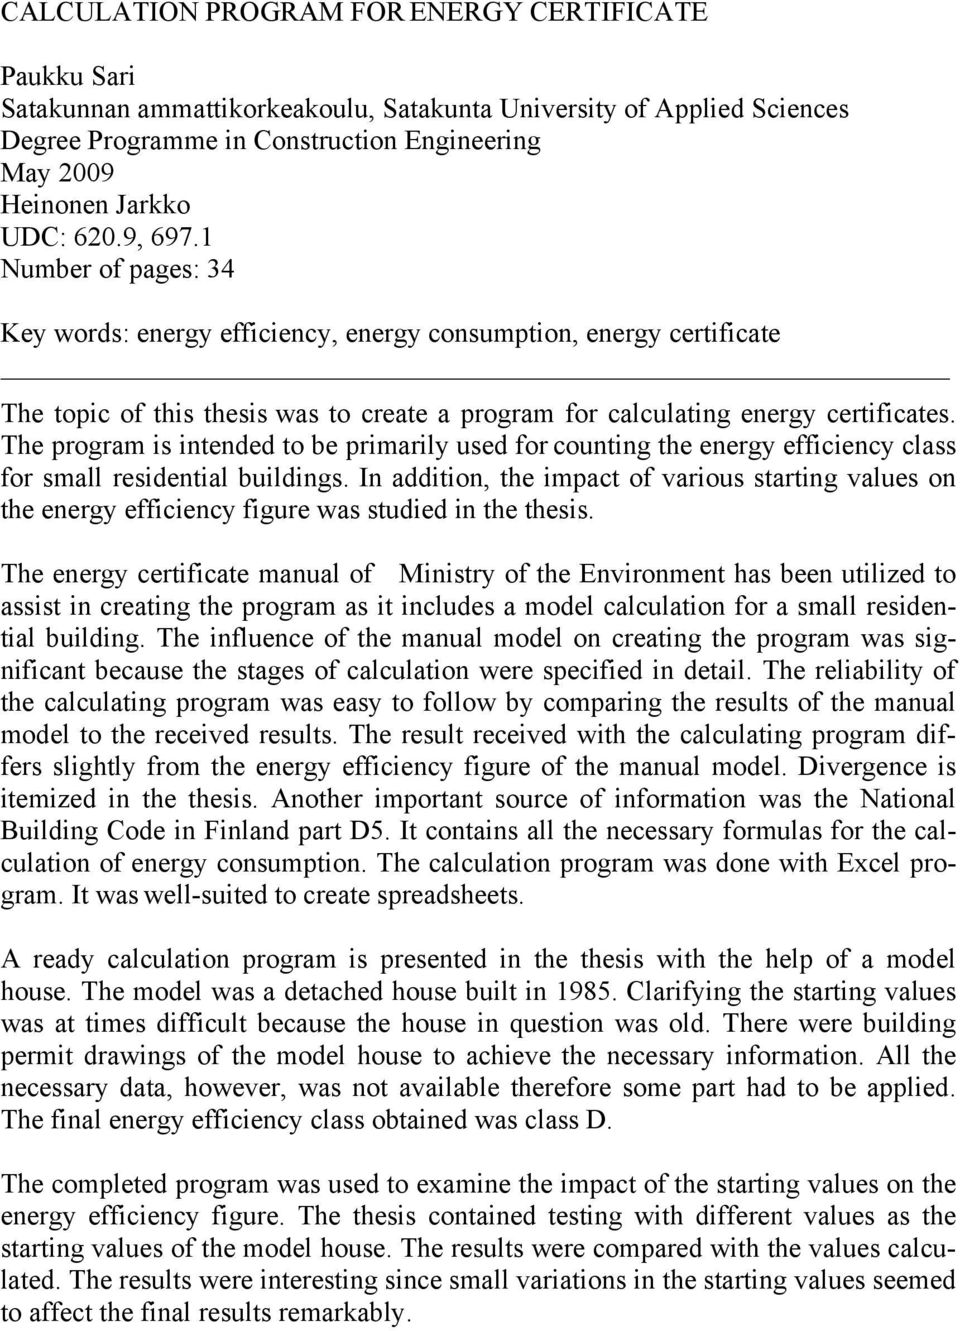 The program is intended to be primarily used for counting the energy efficiency class for small residential buildings.